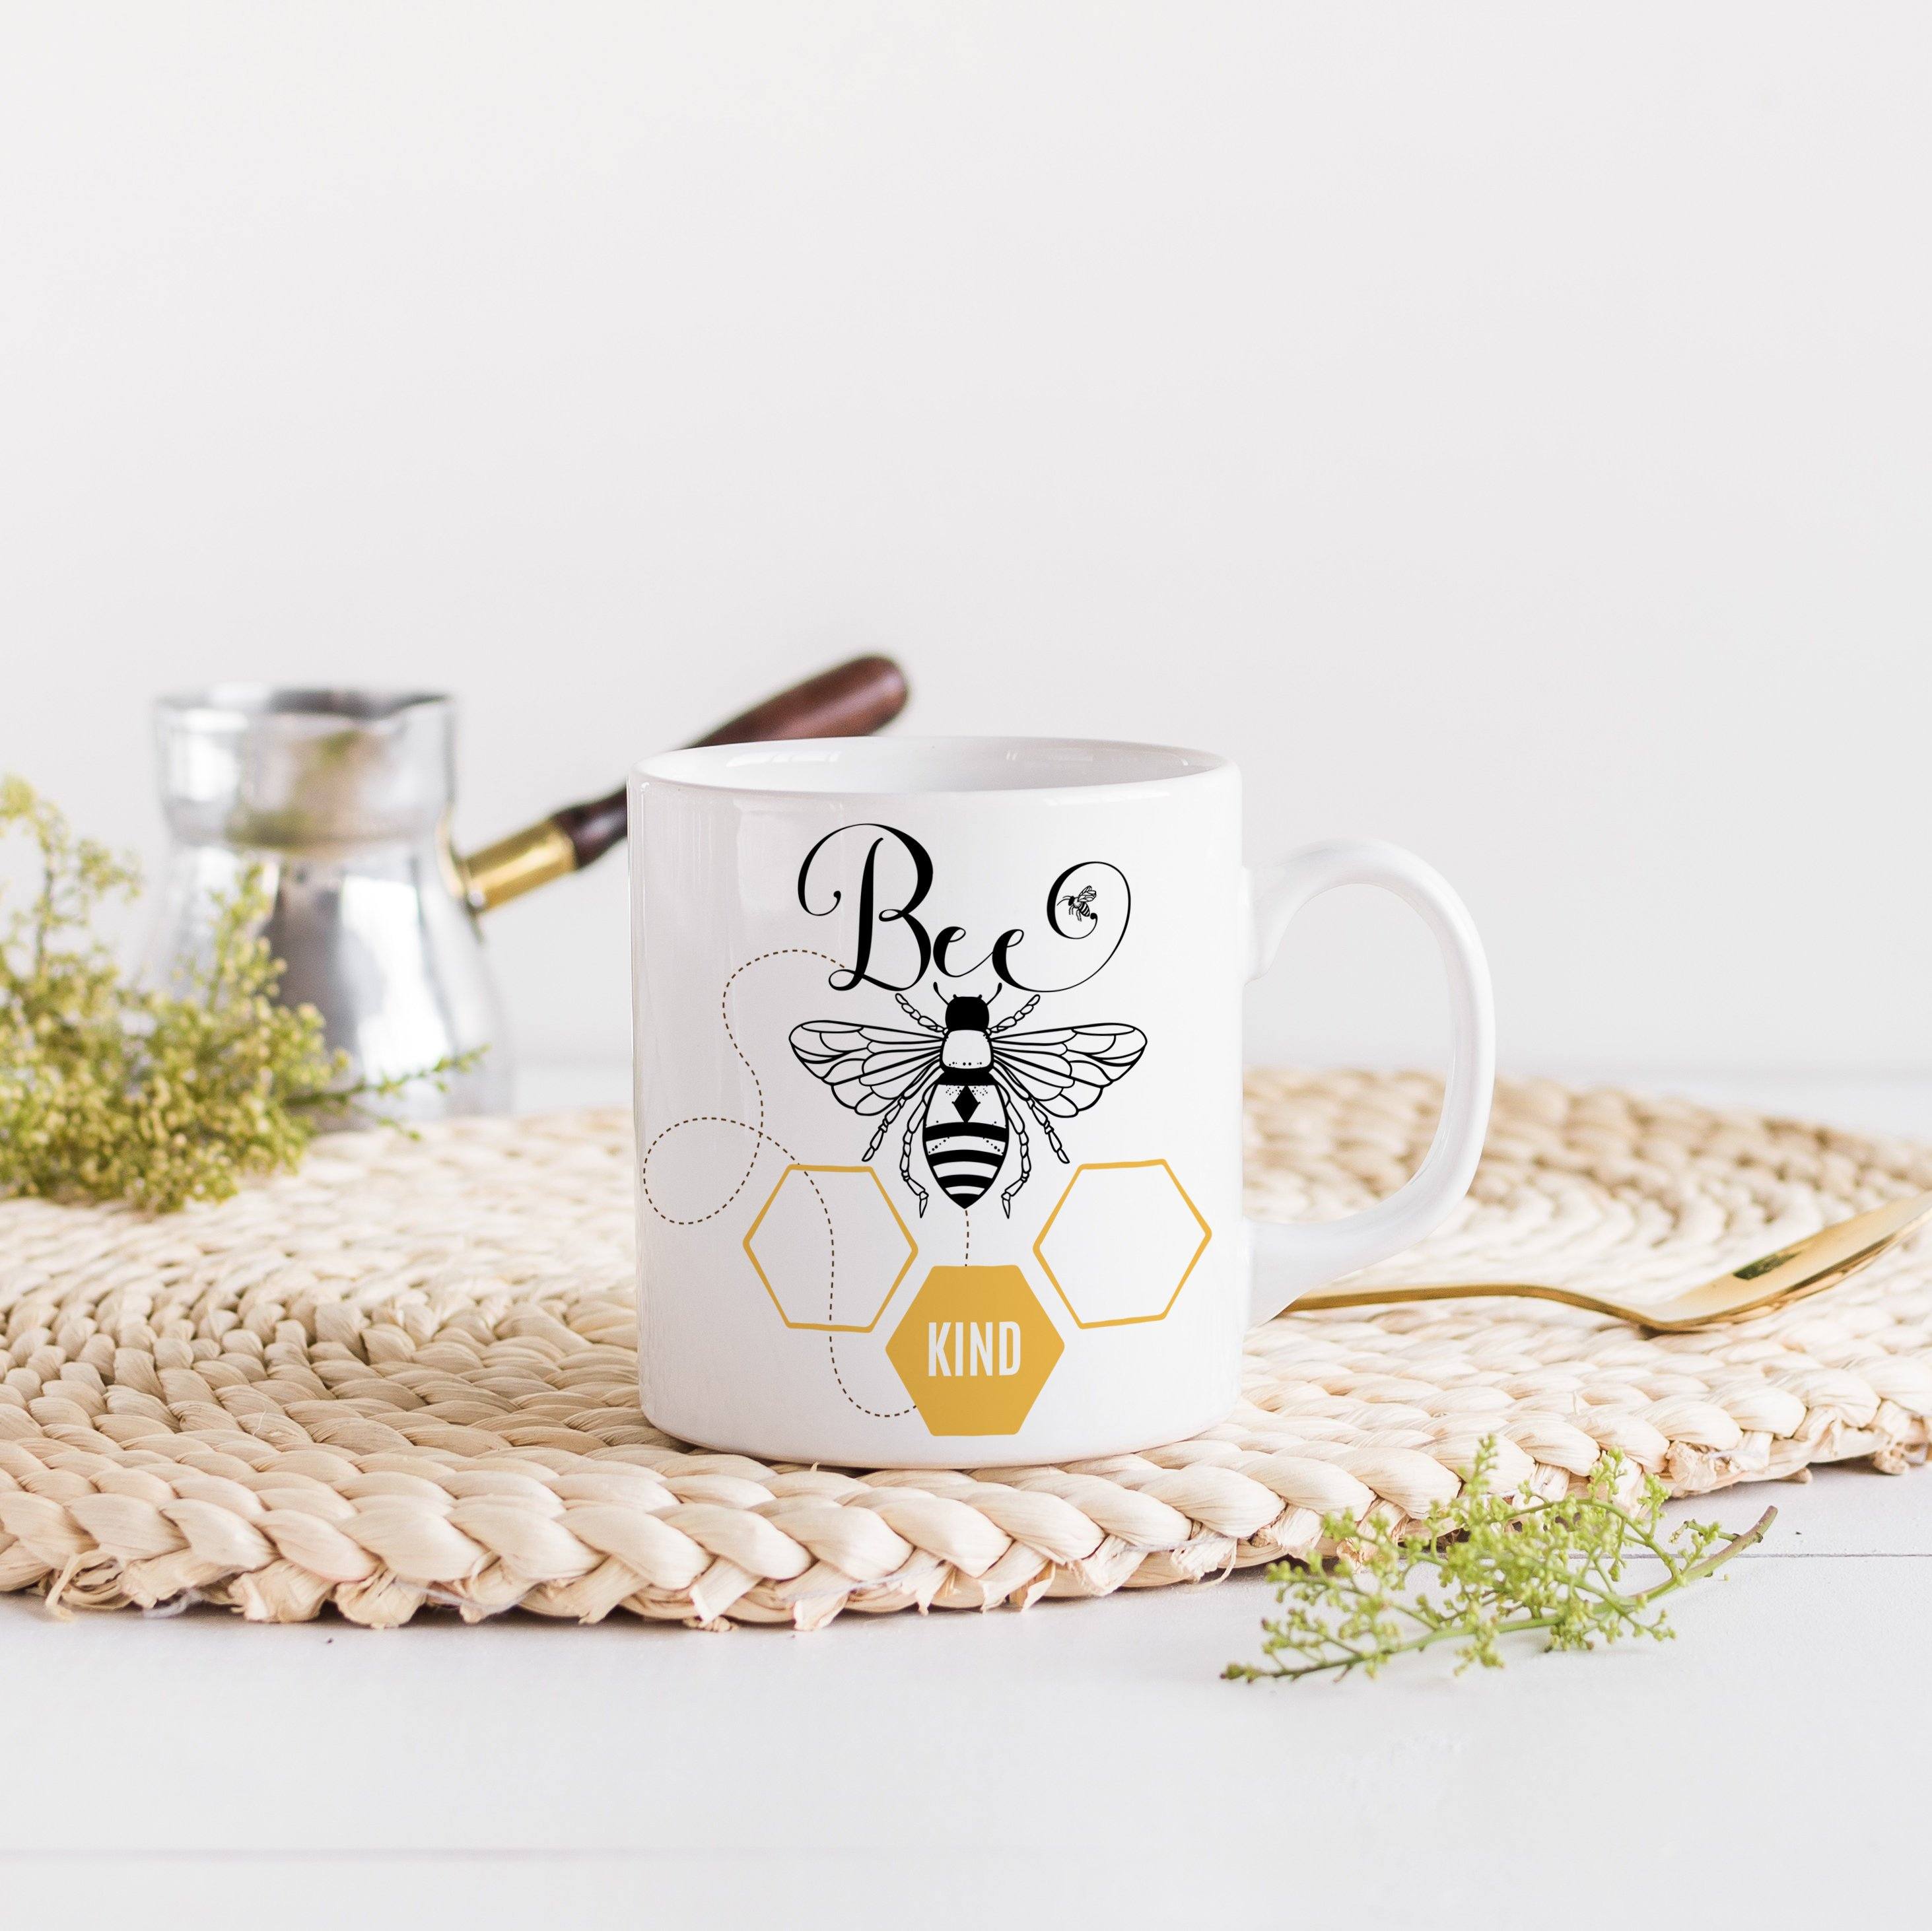 Bee kind mug, Be kind gift for her, him, colleague, employee. Positivity- Kindness- Anti-Bullying gift, Vegan gift